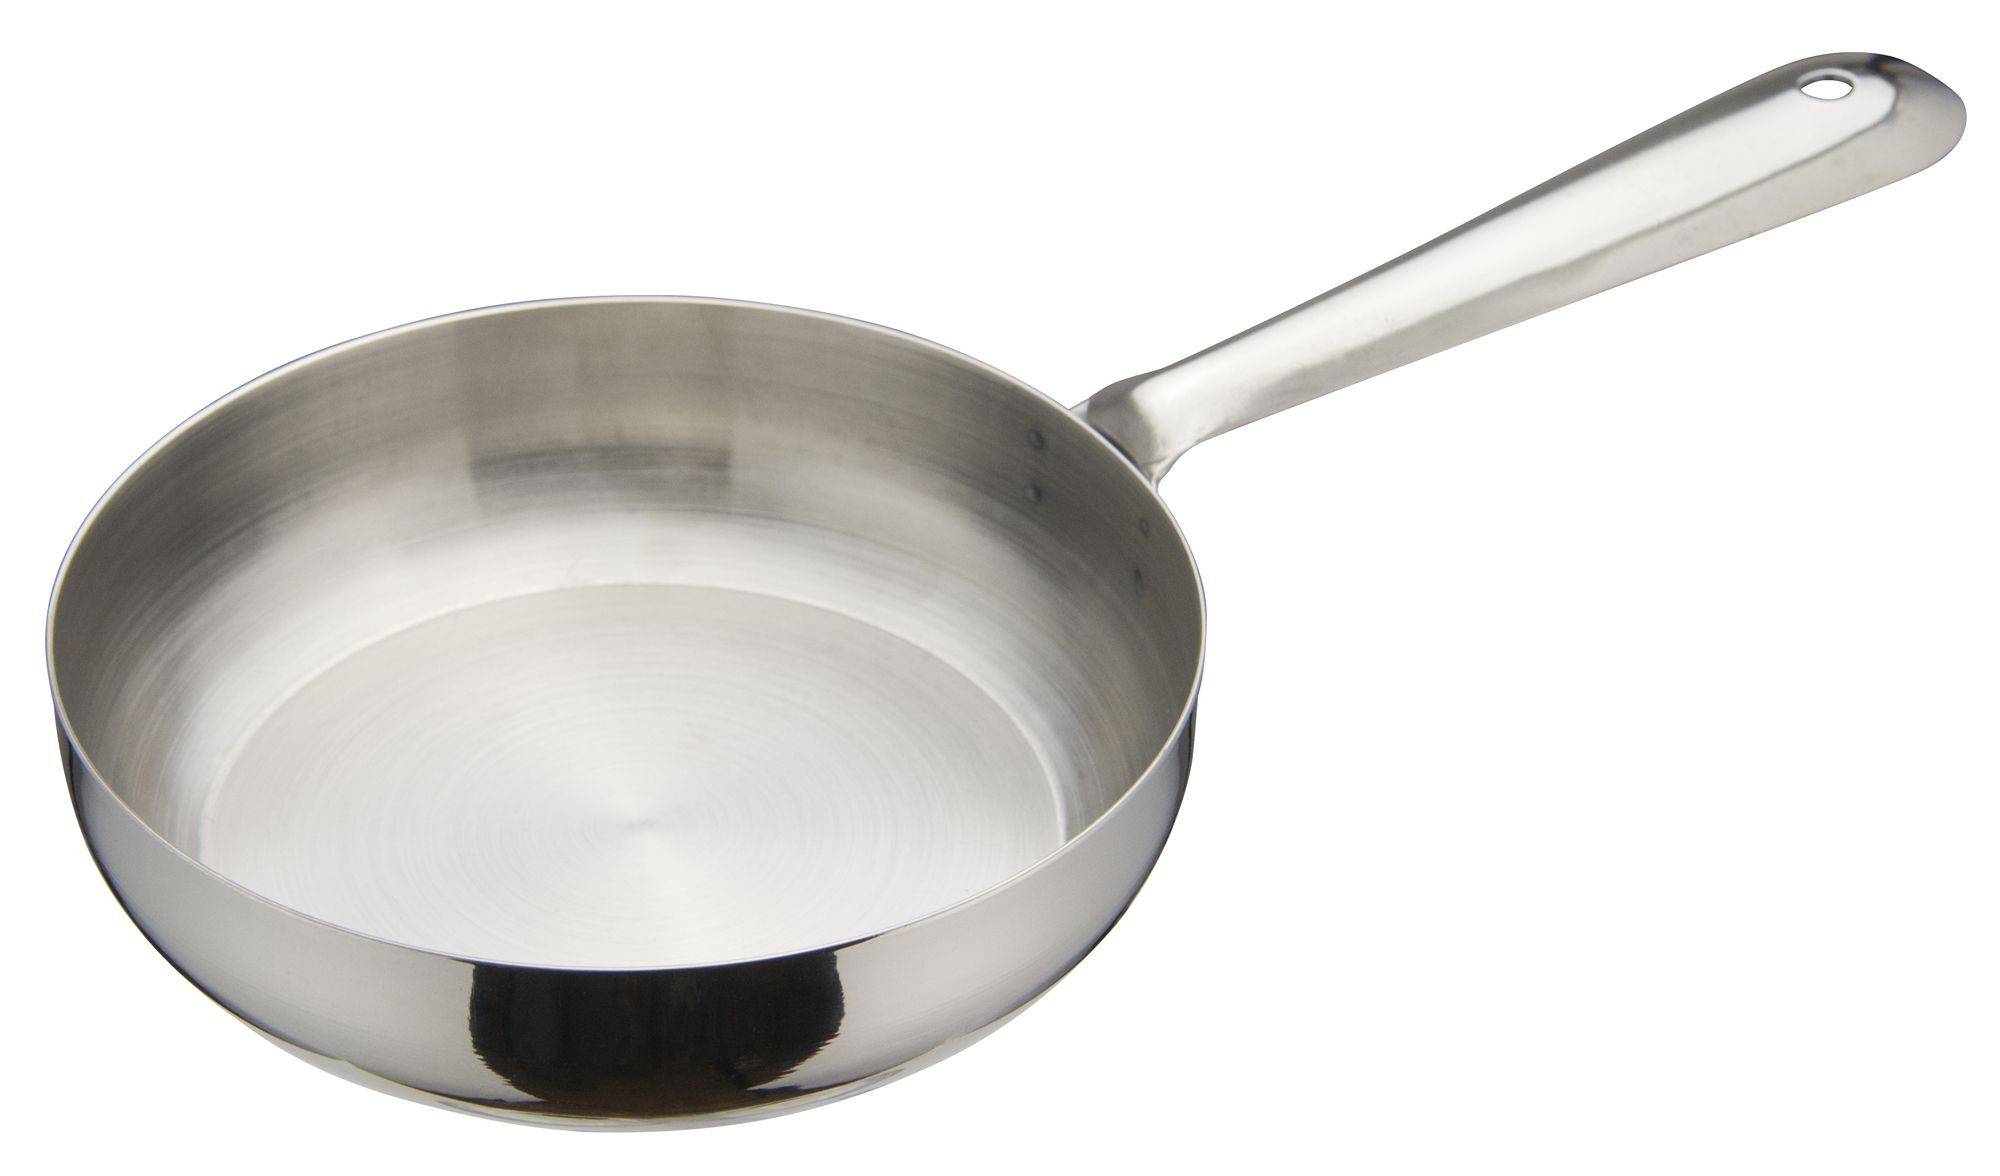 Winco DCWC-103S Stainless Steel 5" Dia x 1-1/8" H Mini Fry Pan